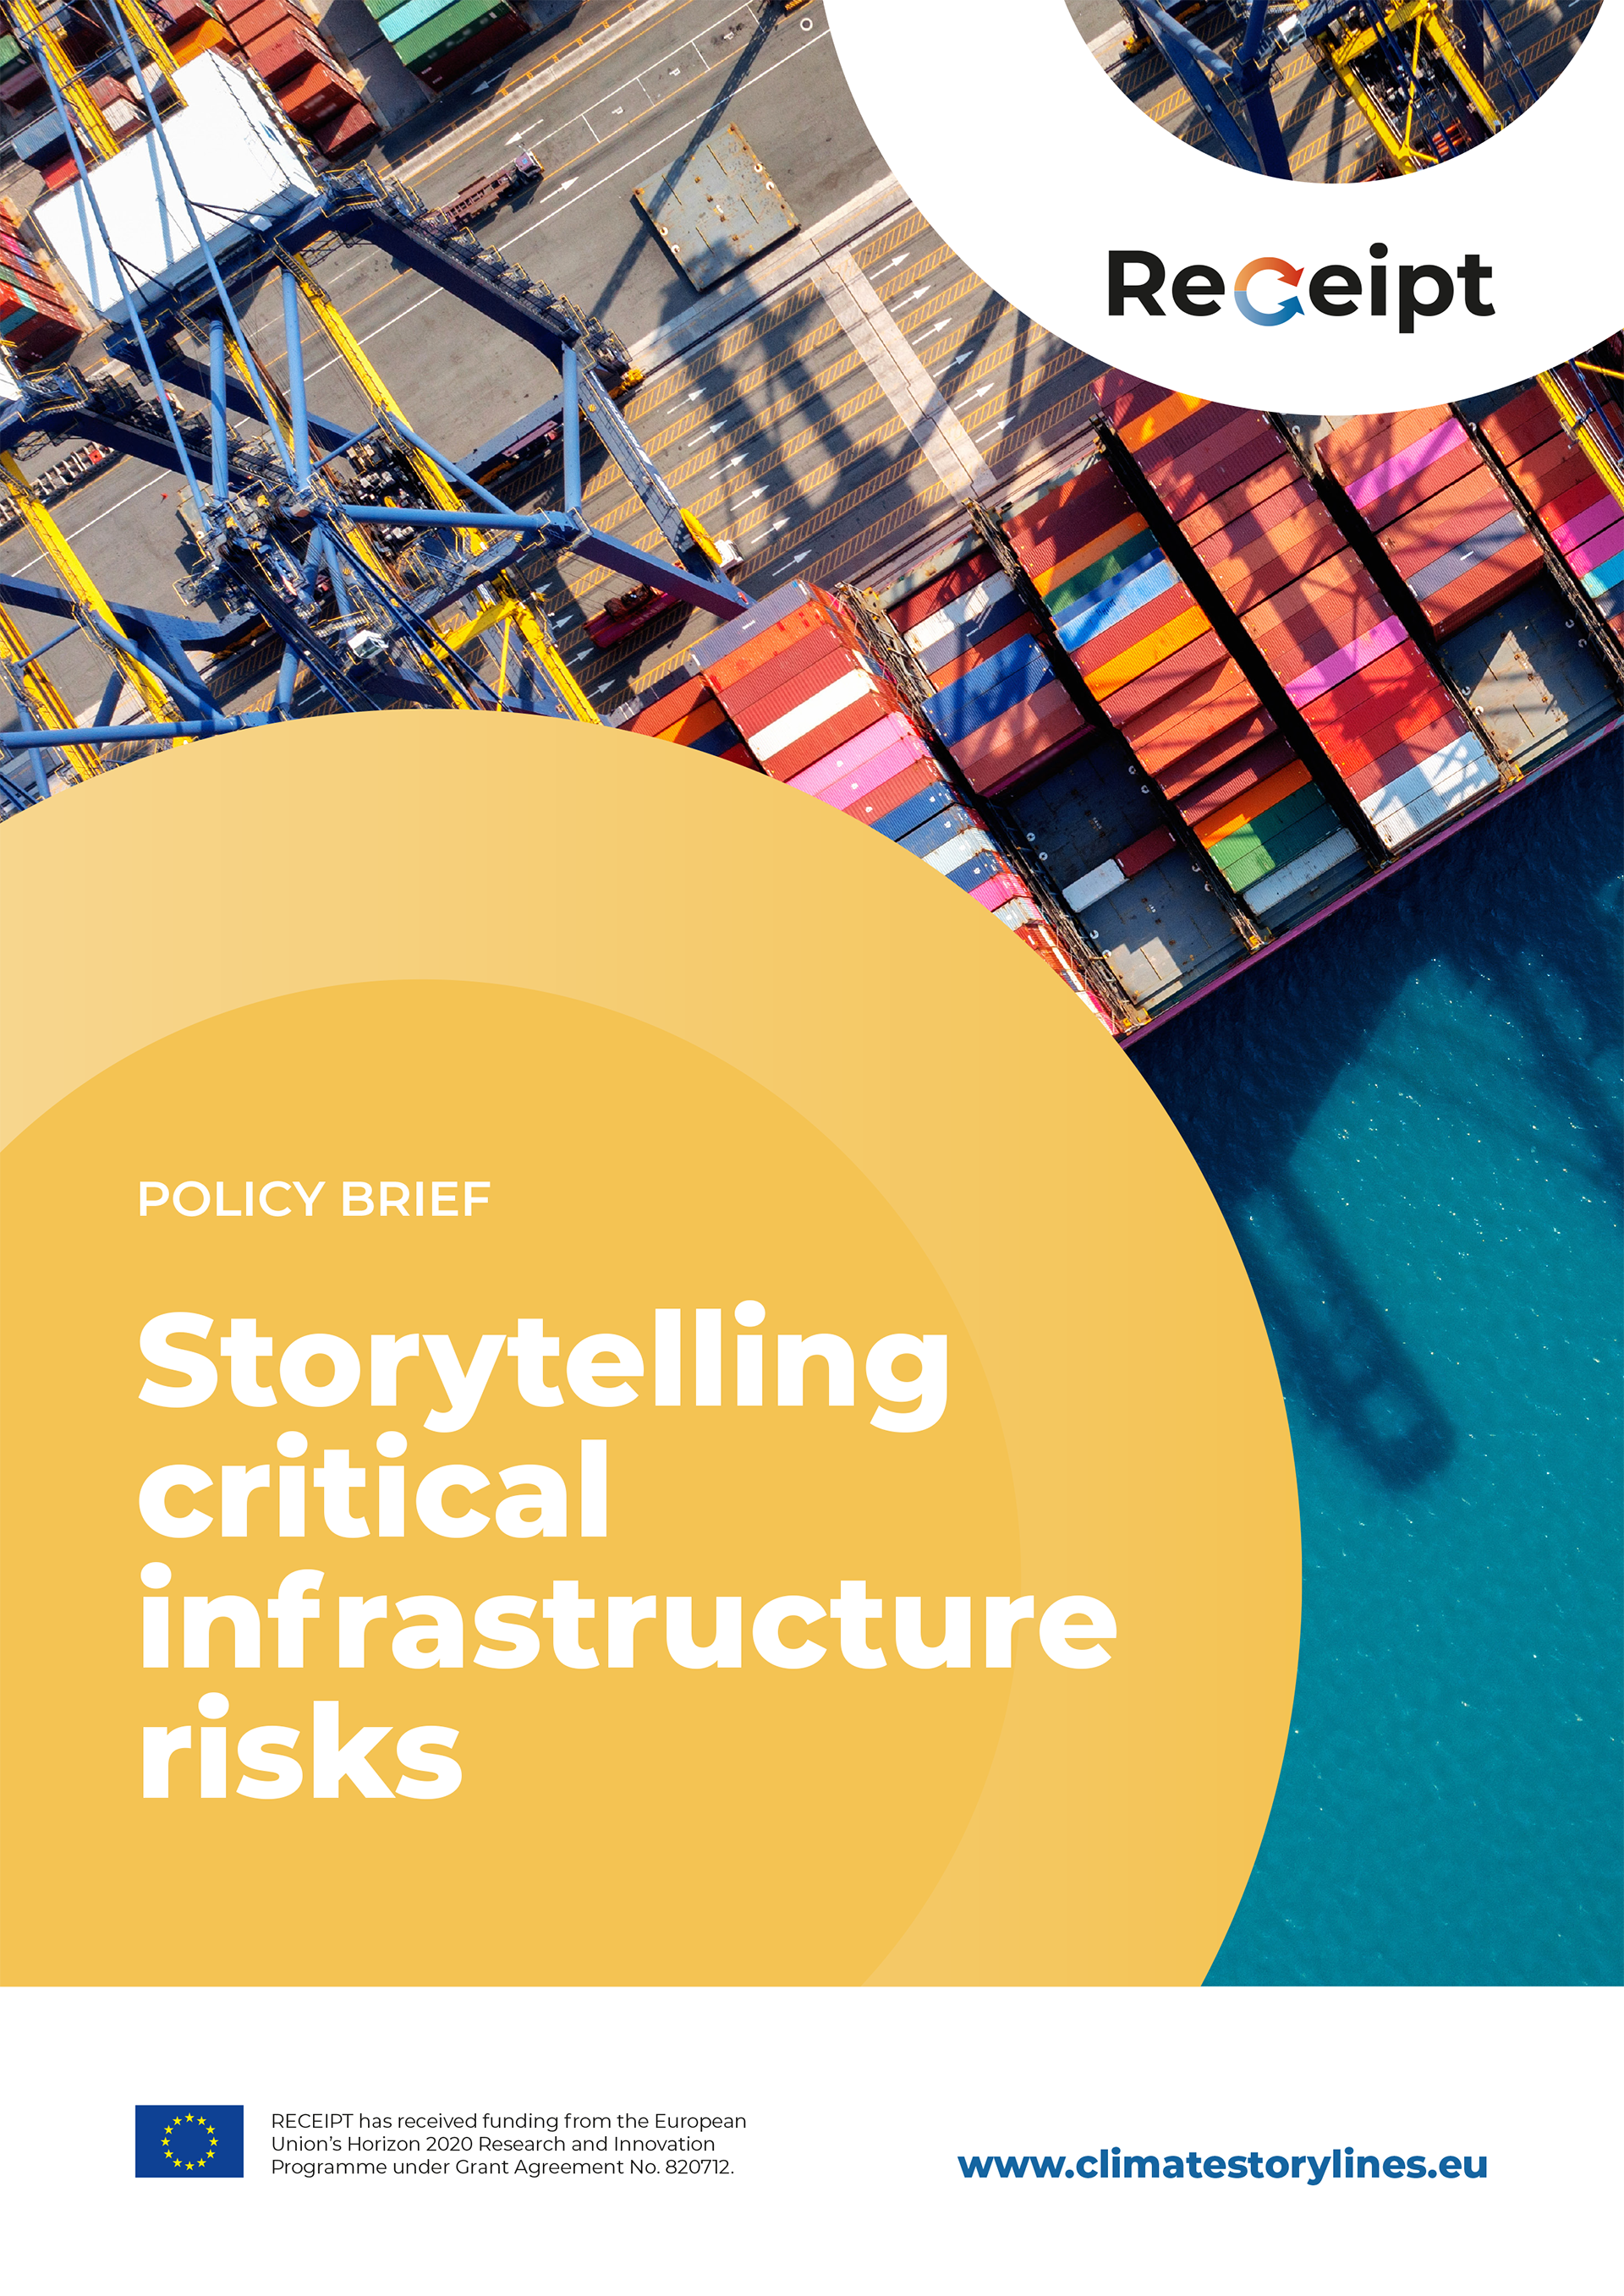 POLICY BRIEF Storytelling critical infrastructure risks